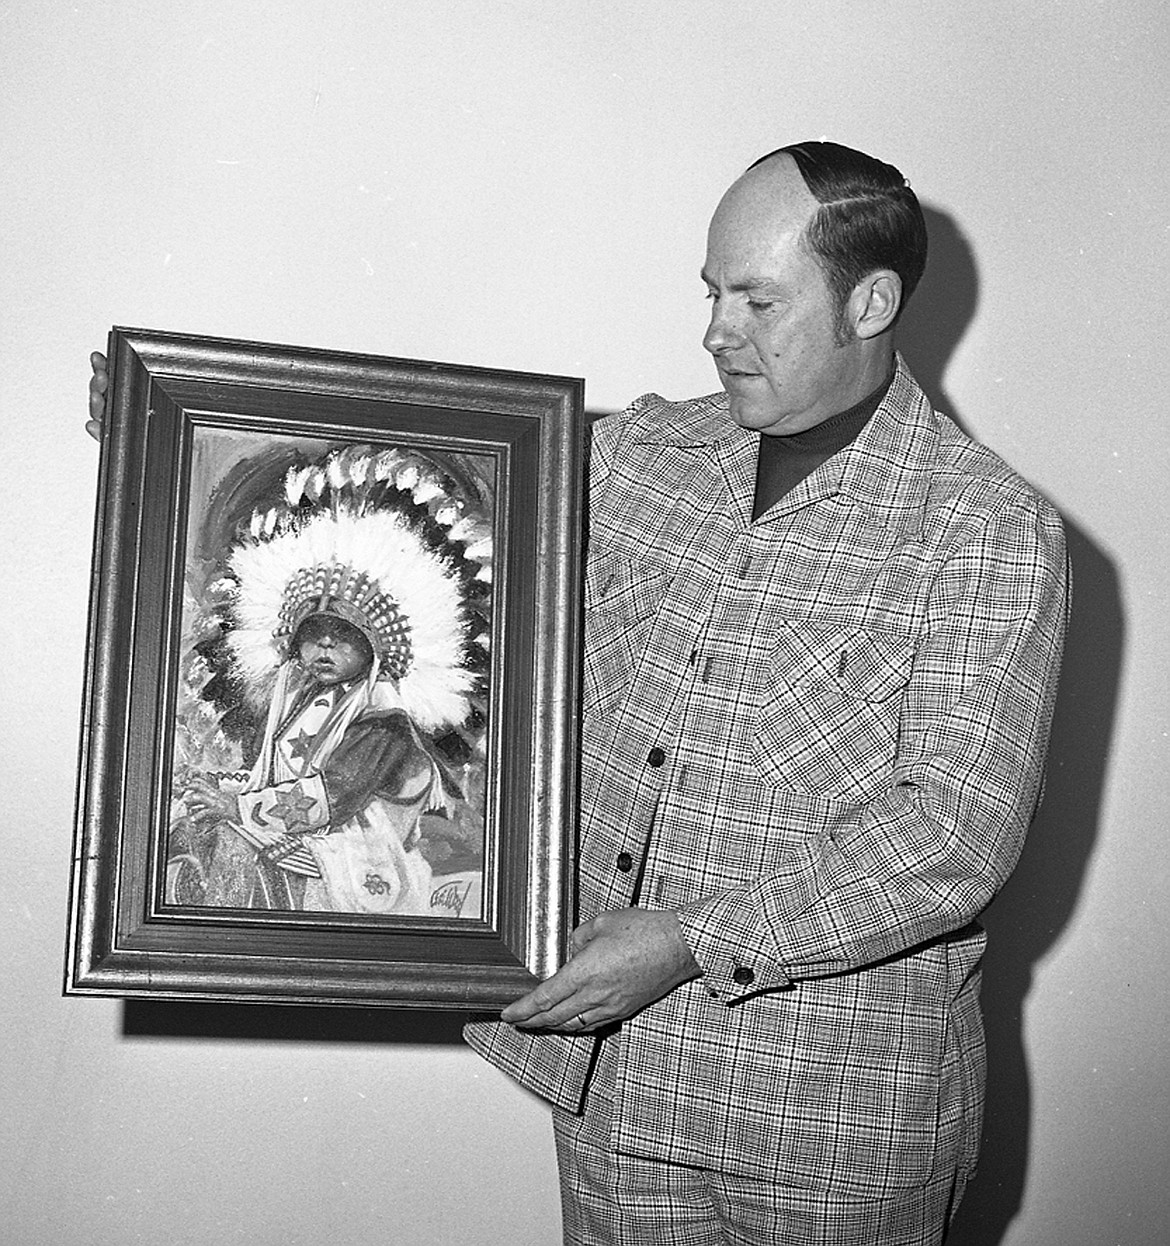 NEIL ELIASON won the fourth Great Chief award from the Kalispell Chamber of Commerce in 1975. Here he proudly displays the Geri Wood oil painting named &#147;Little Chief&#148; that he was honored with. (Inter Lake file photo/Sarah Taylor)